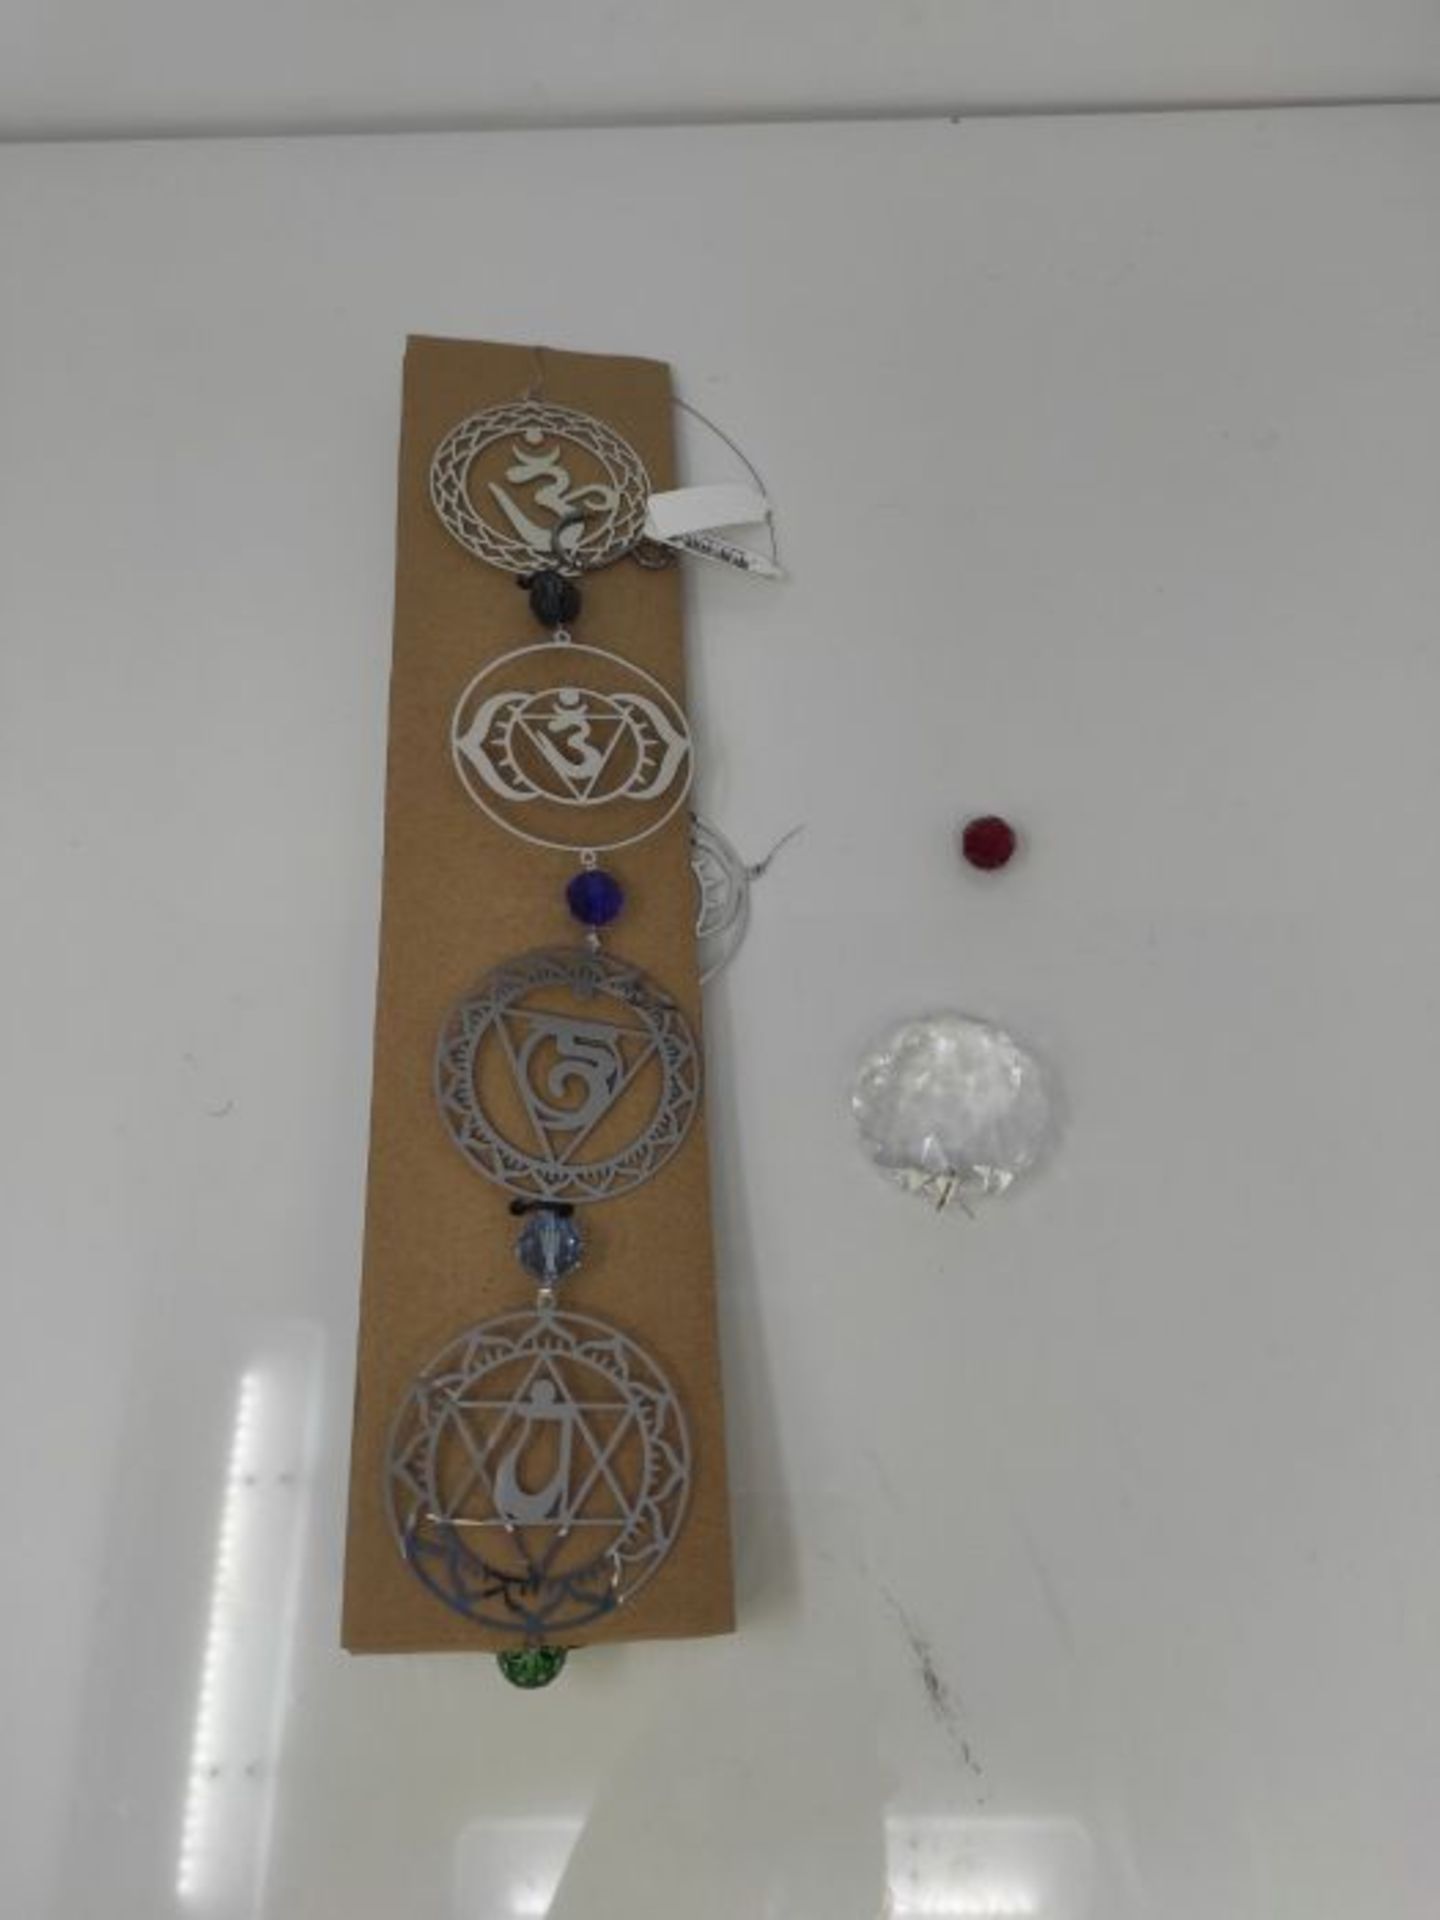 NATURE´S MELODY Magic Crystal Wind Chime Silver Coloured Multi-Coloured Stones - Image 2 of 3